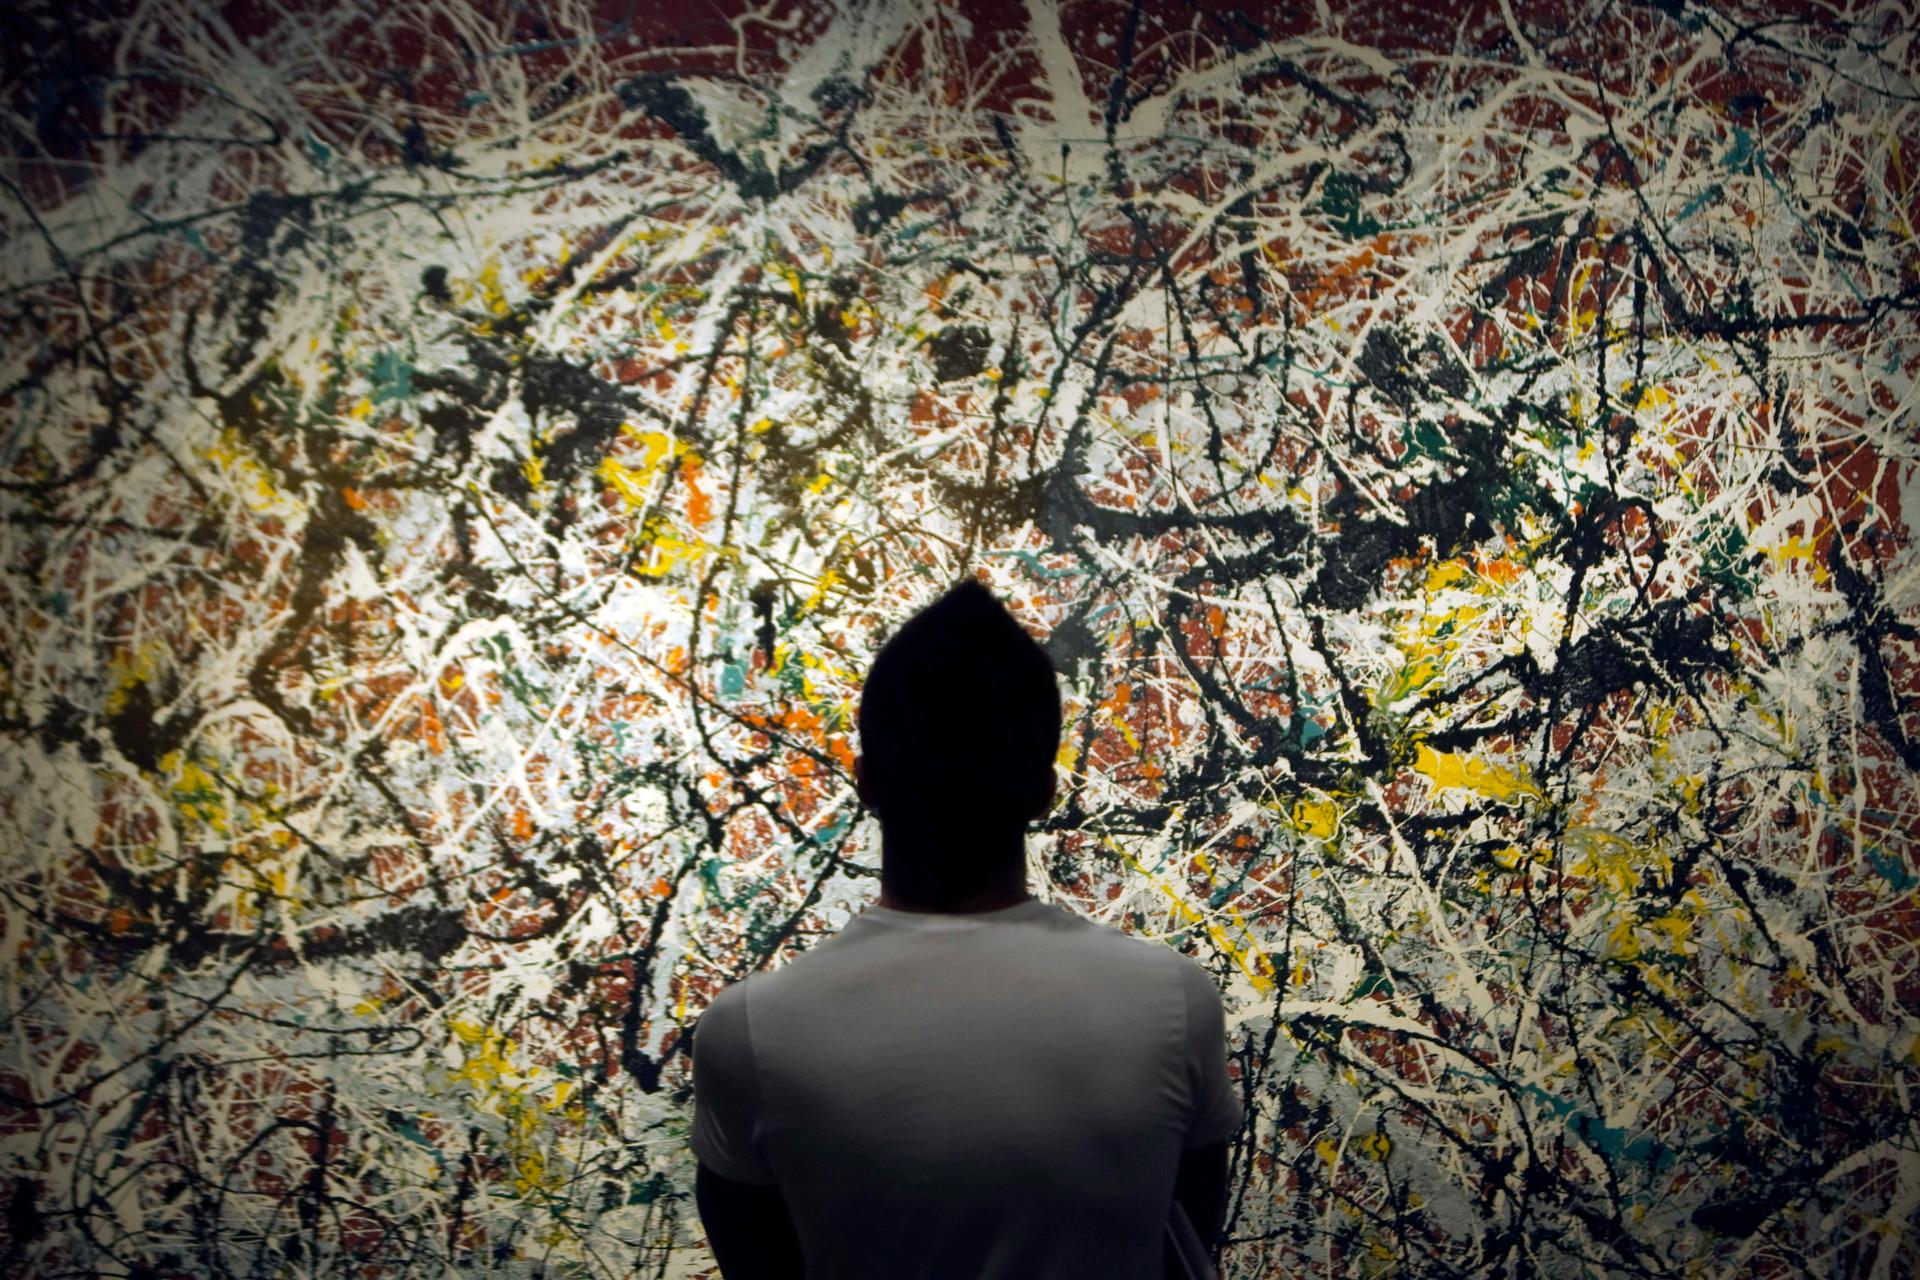 A Tehran Art University student looks at a painting by 20th century U.S. artist Jackson Pollock at Tehran's Museum of Contemporary Art June 19, 2010.